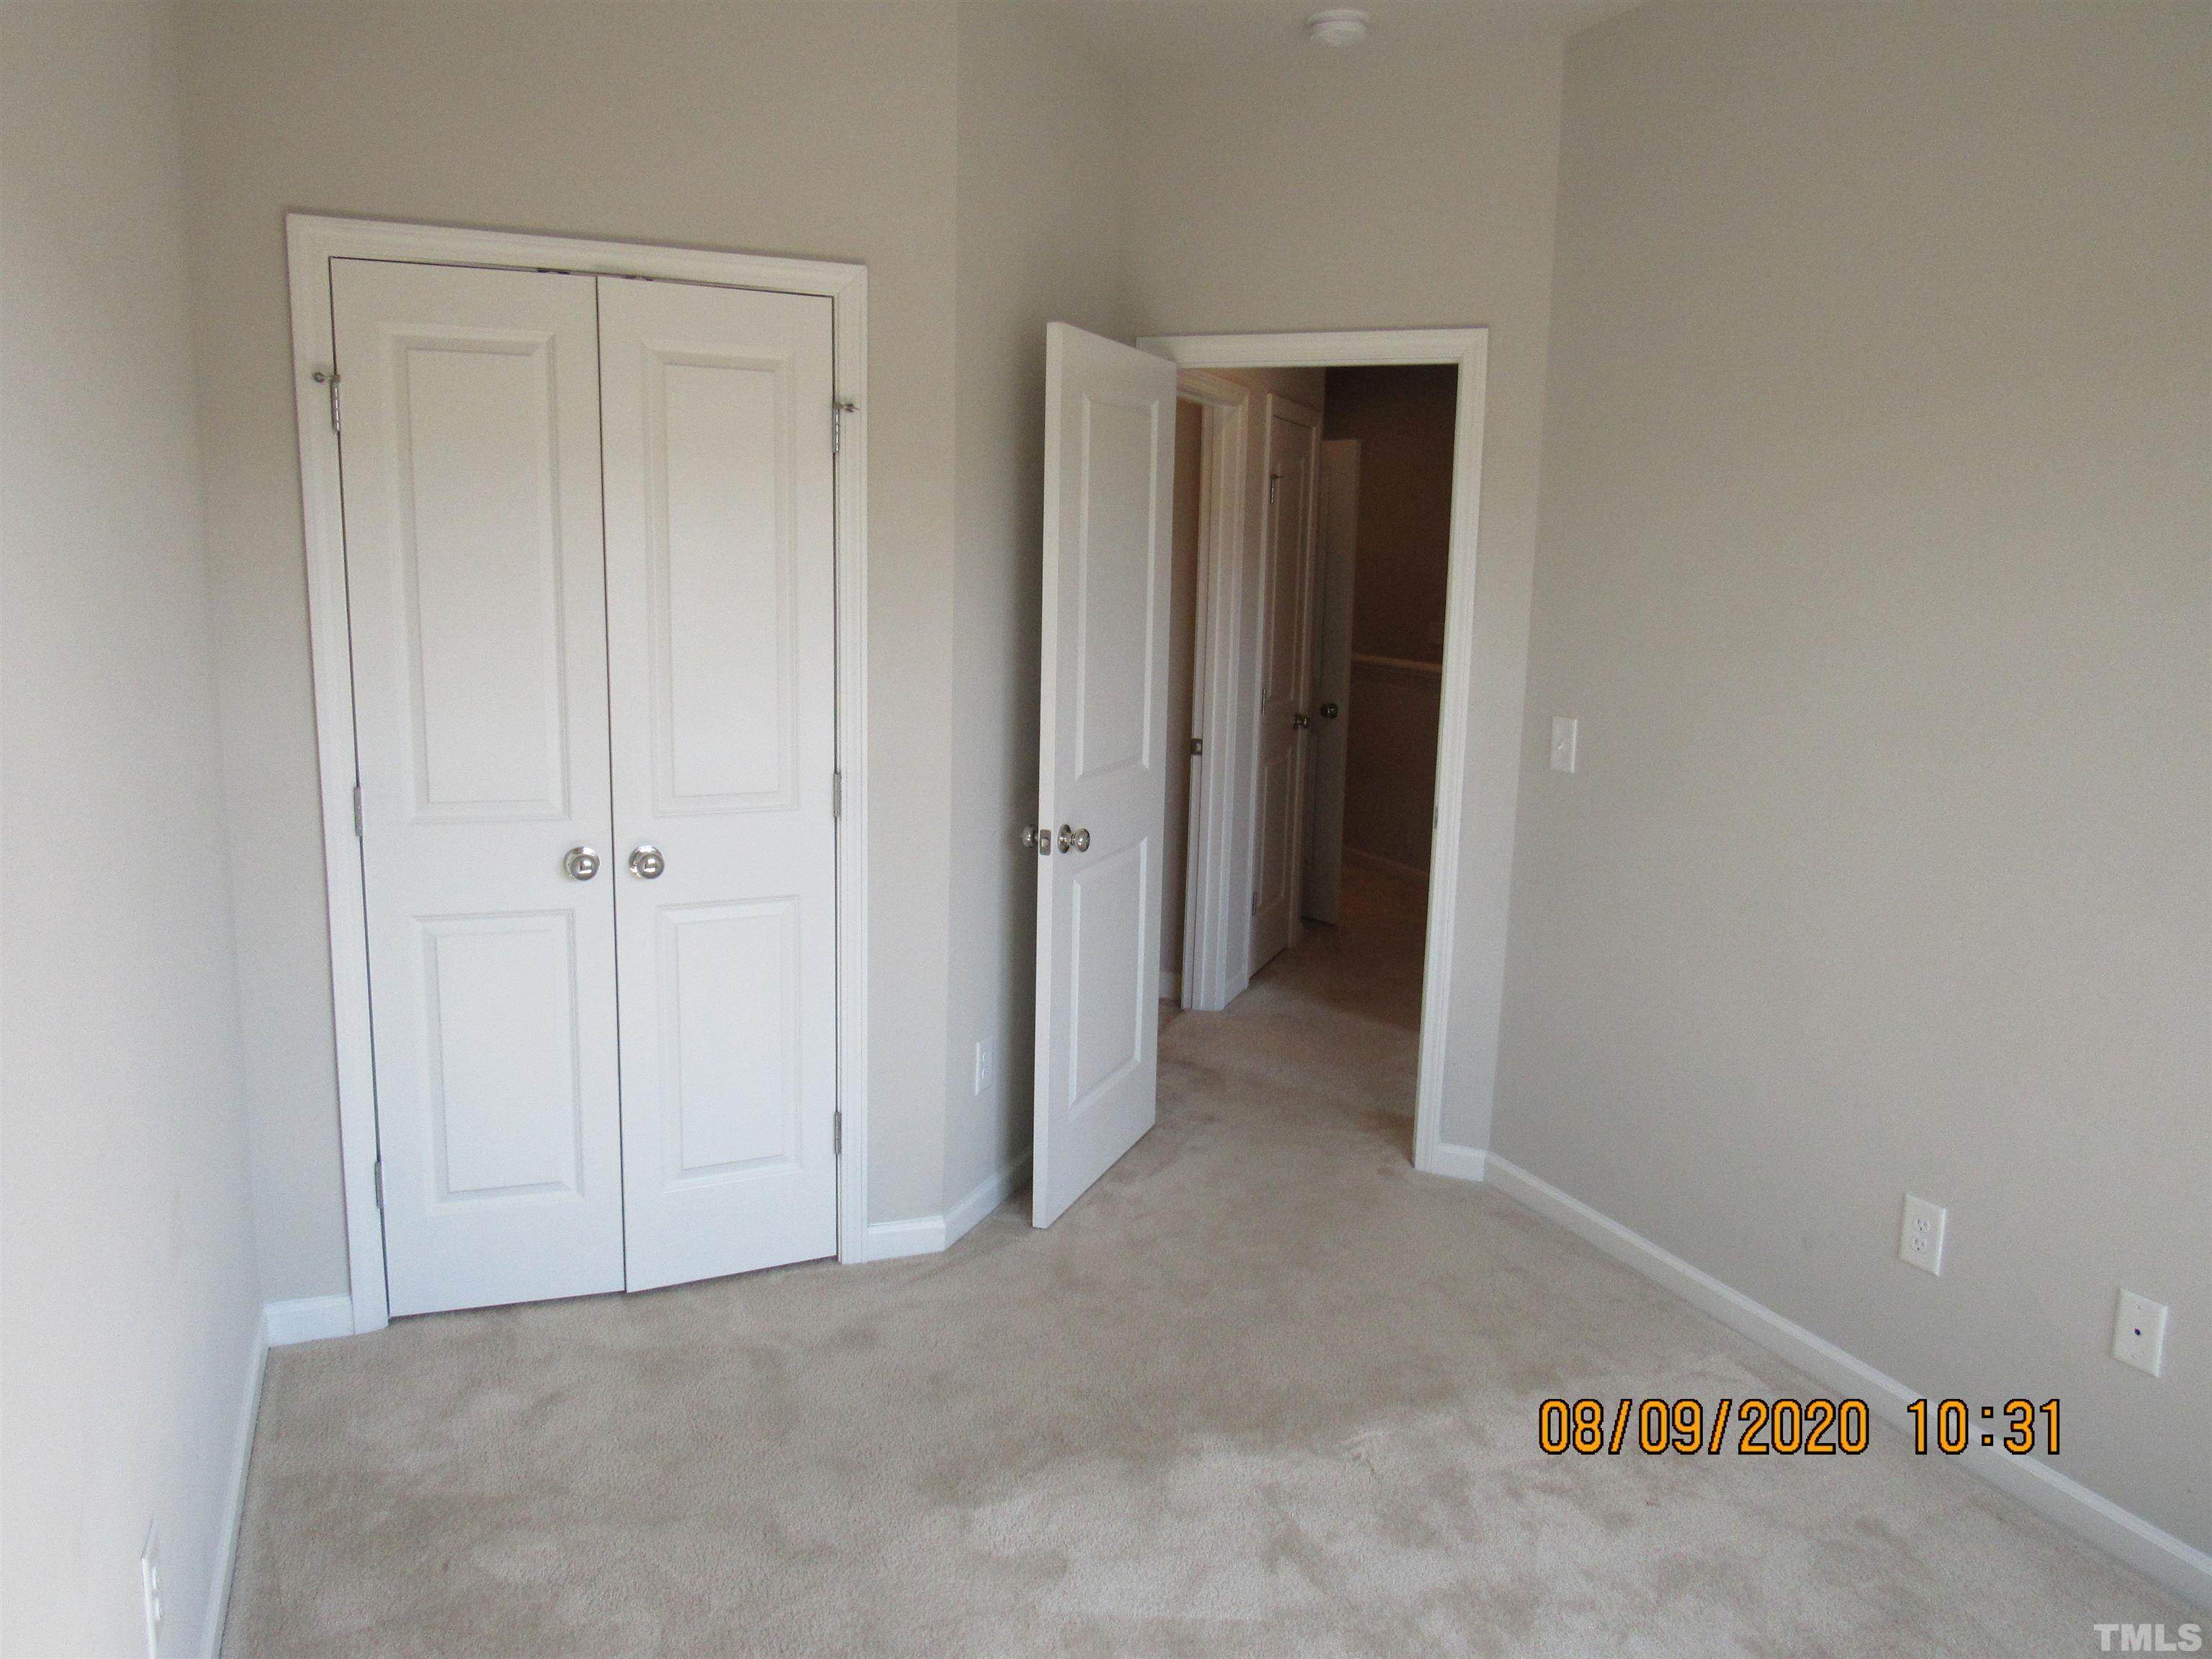 a view of a hallway with closet area